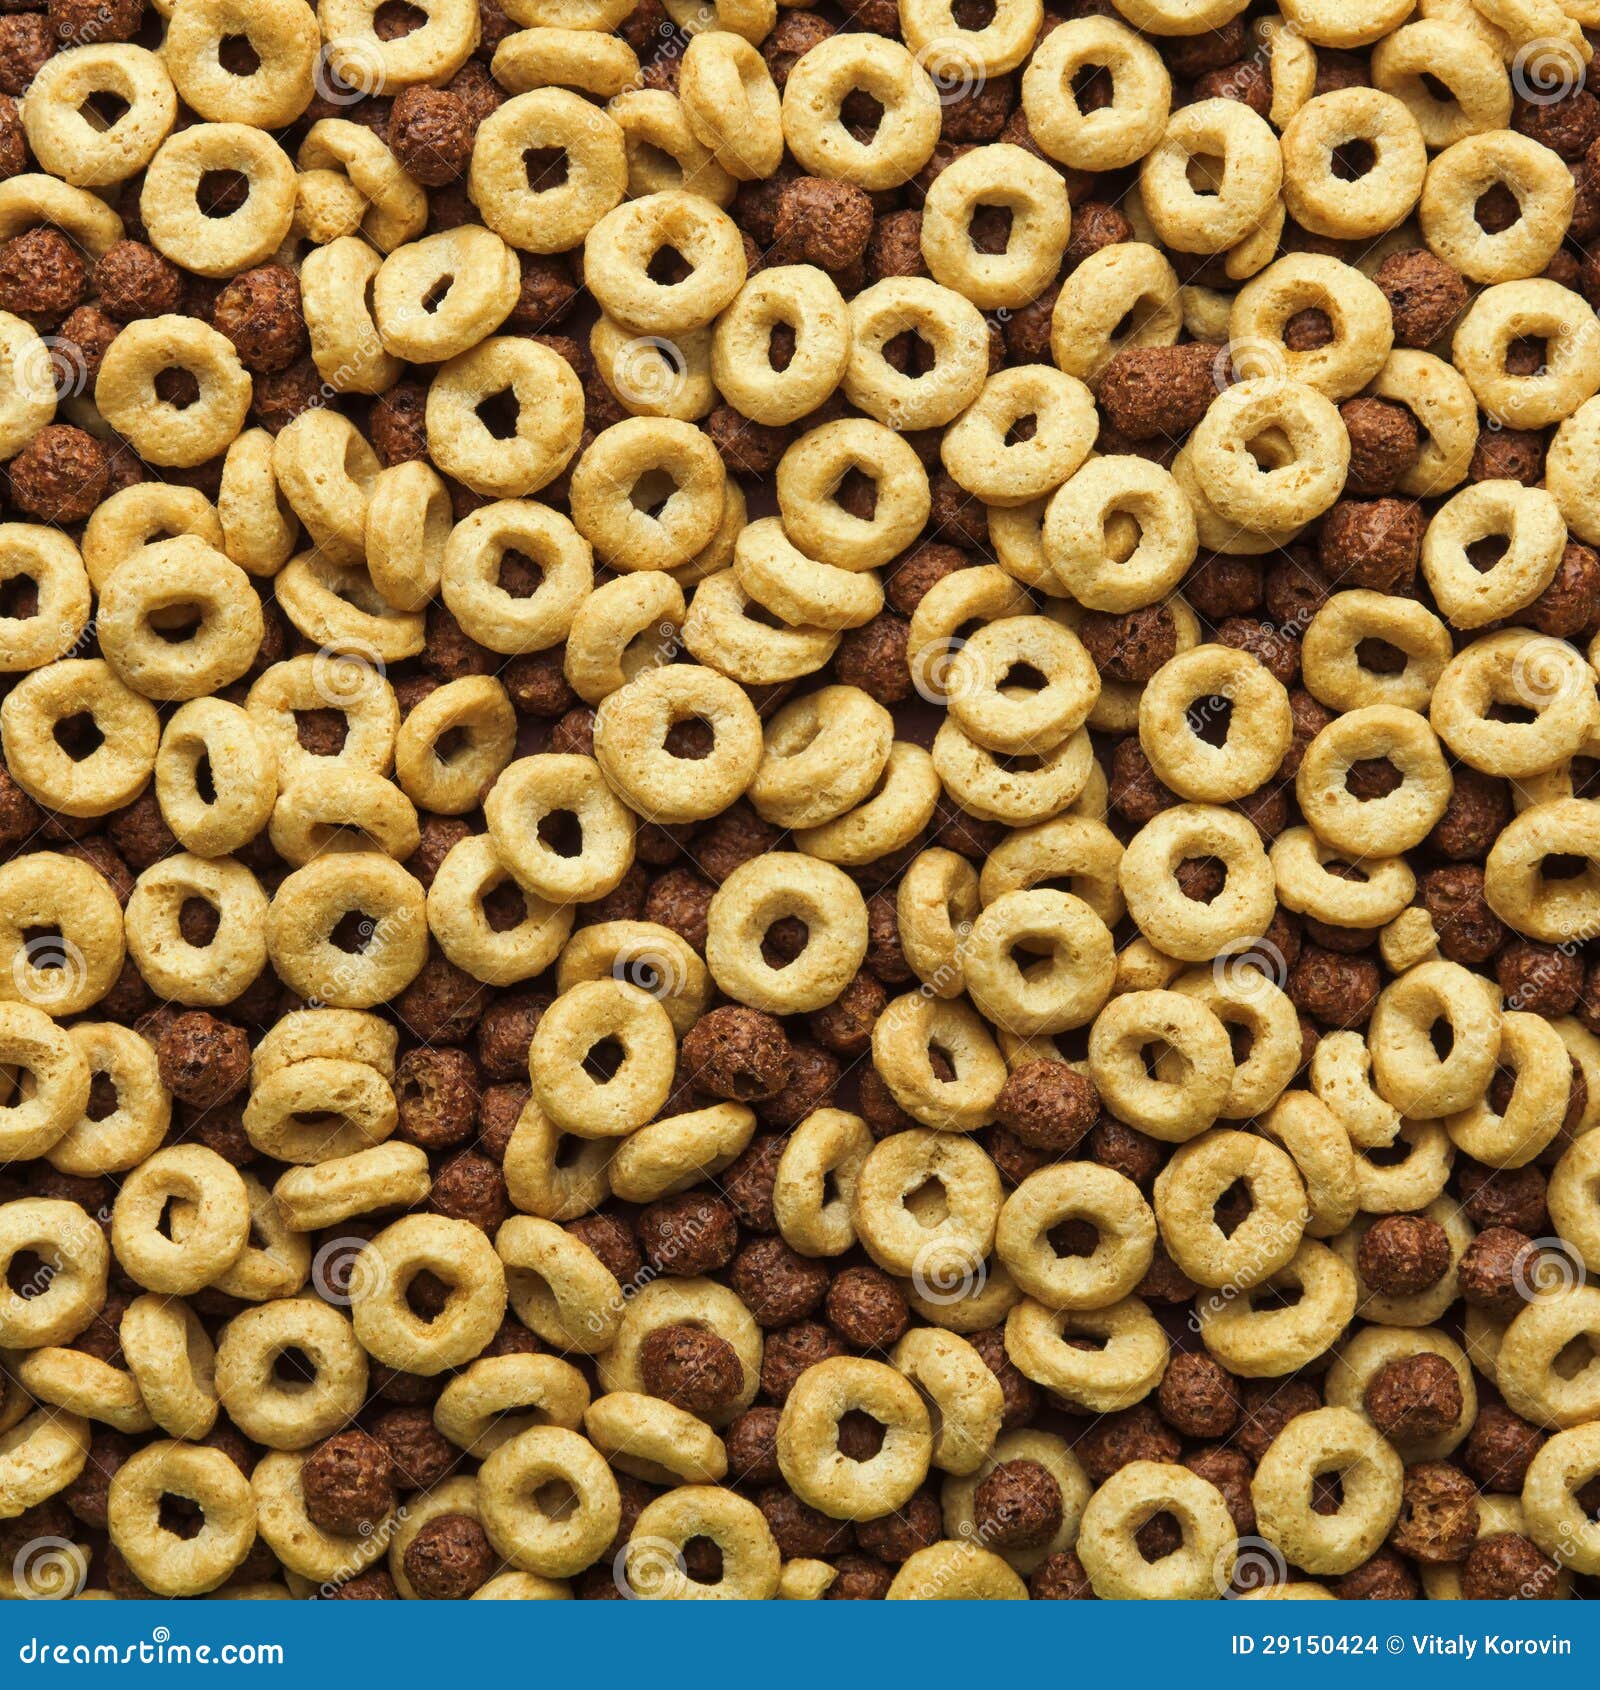 Breakfast Cereal Background Stock Photo Image of ring 